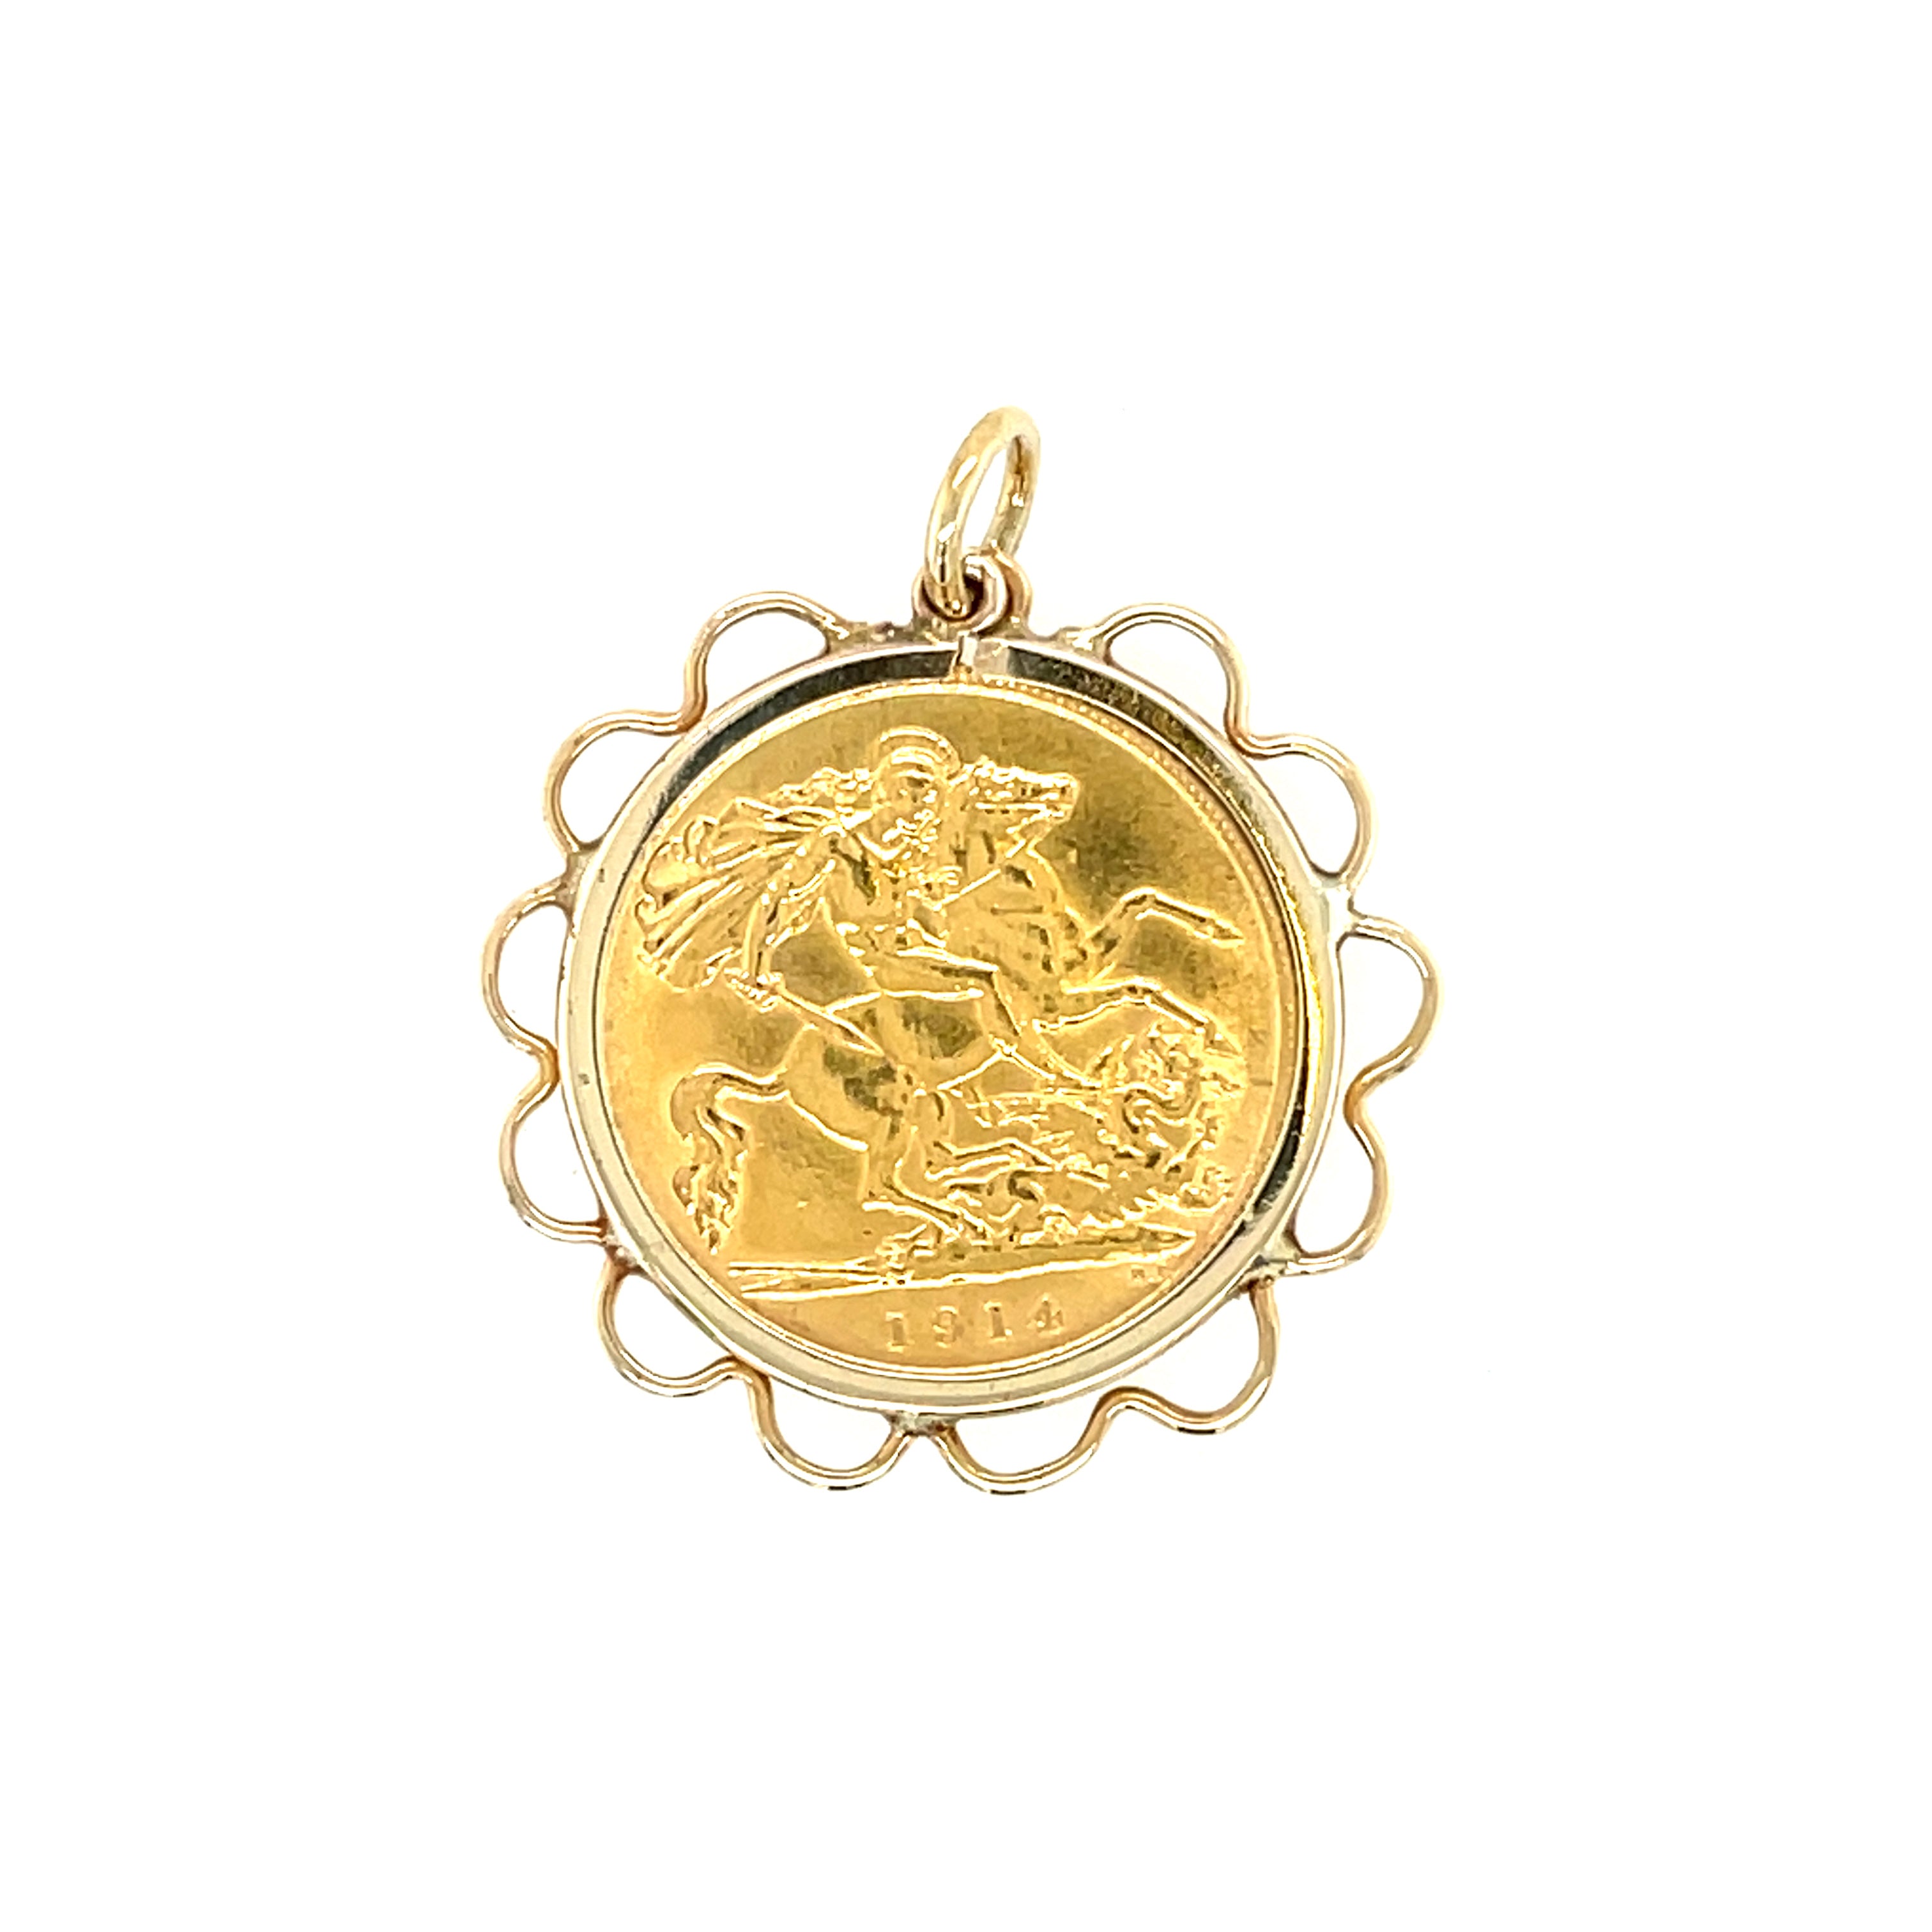 1914 George V Half Sovereign Coin & 9ct Gold Frill Pendant Mount